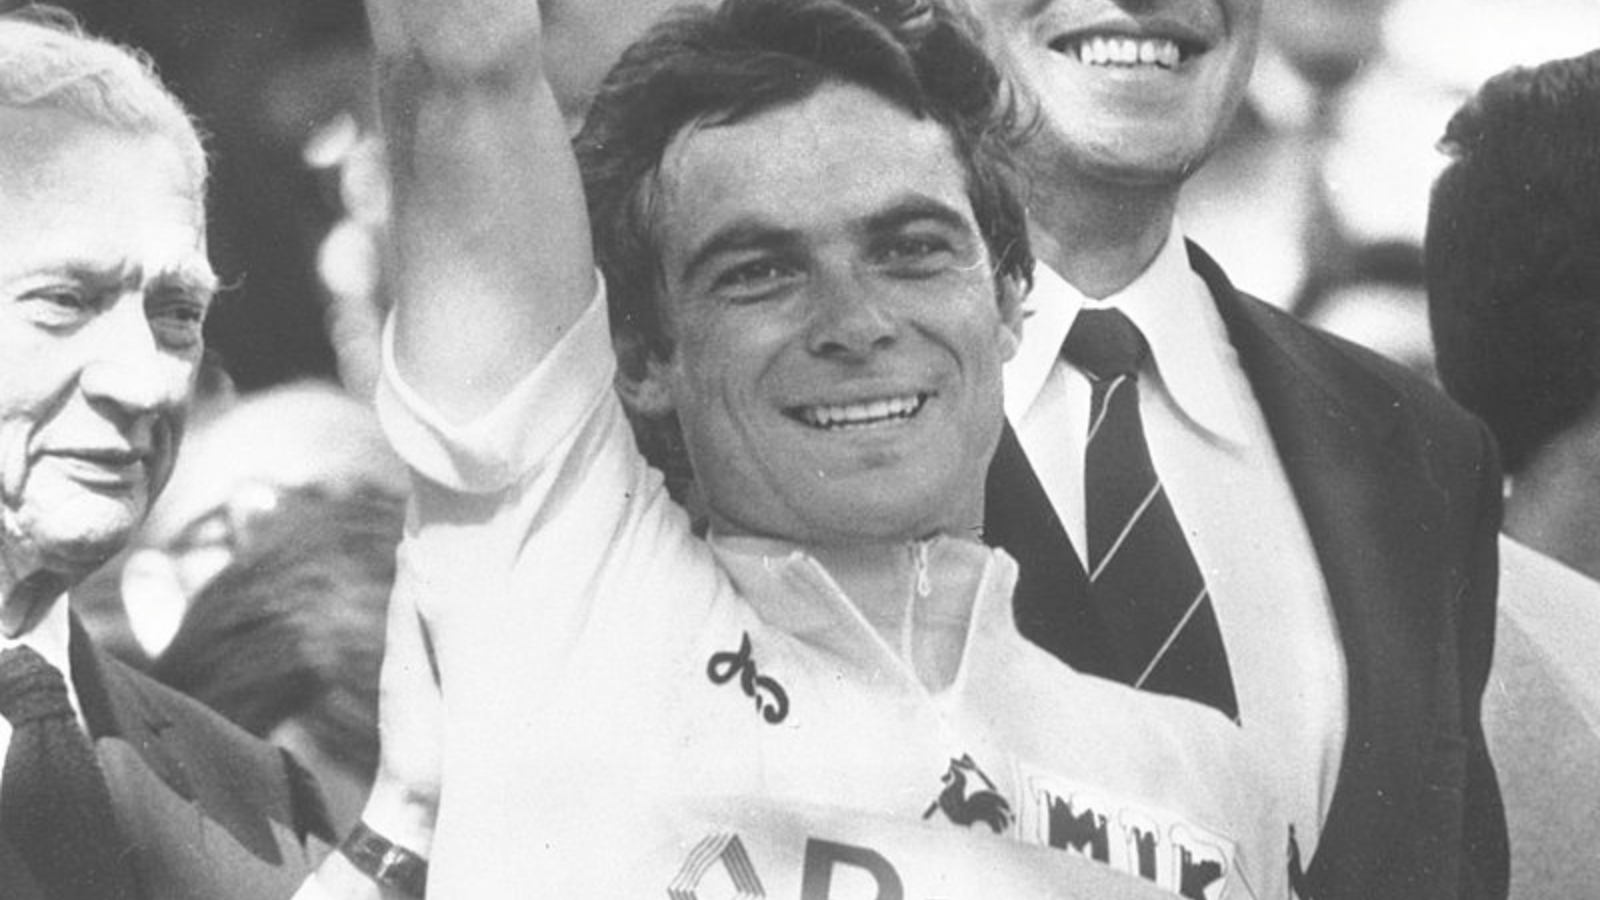 5-time Tour de France winner Bernard Hinault celebrating his first victory in 1978